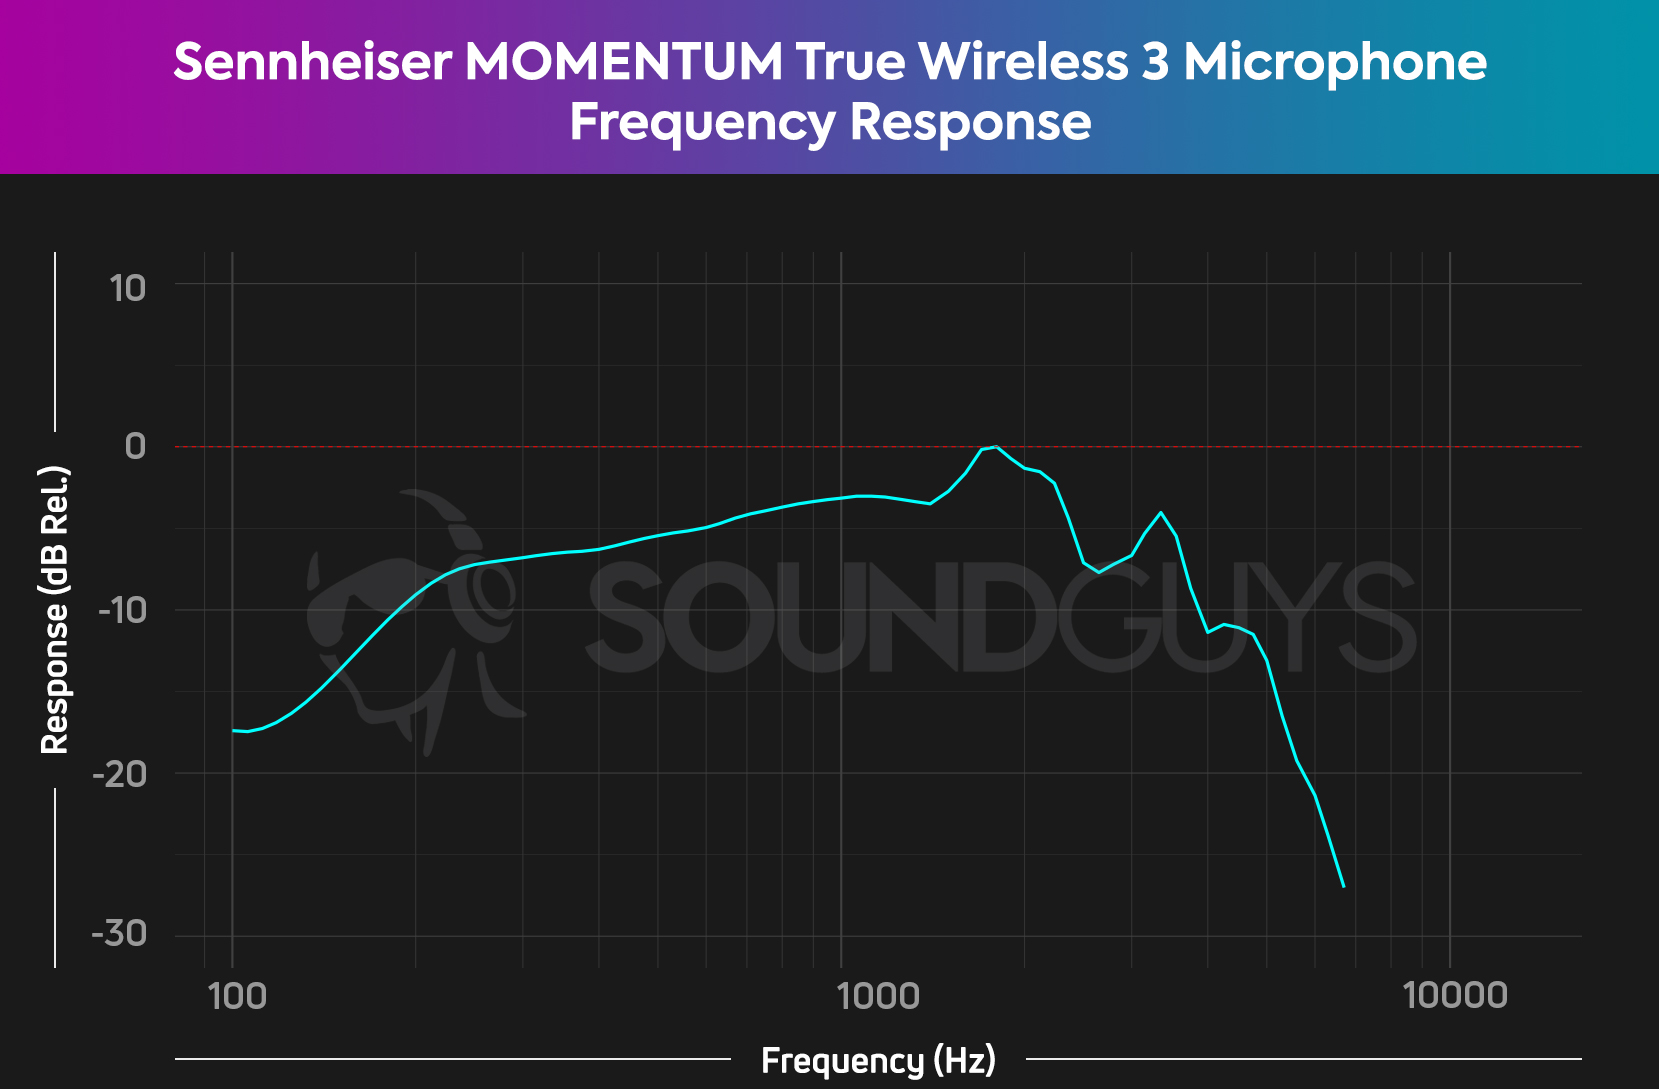 A chart shows the Sennheiser MOMENTUM True Wireless 3 microphone frequency response.